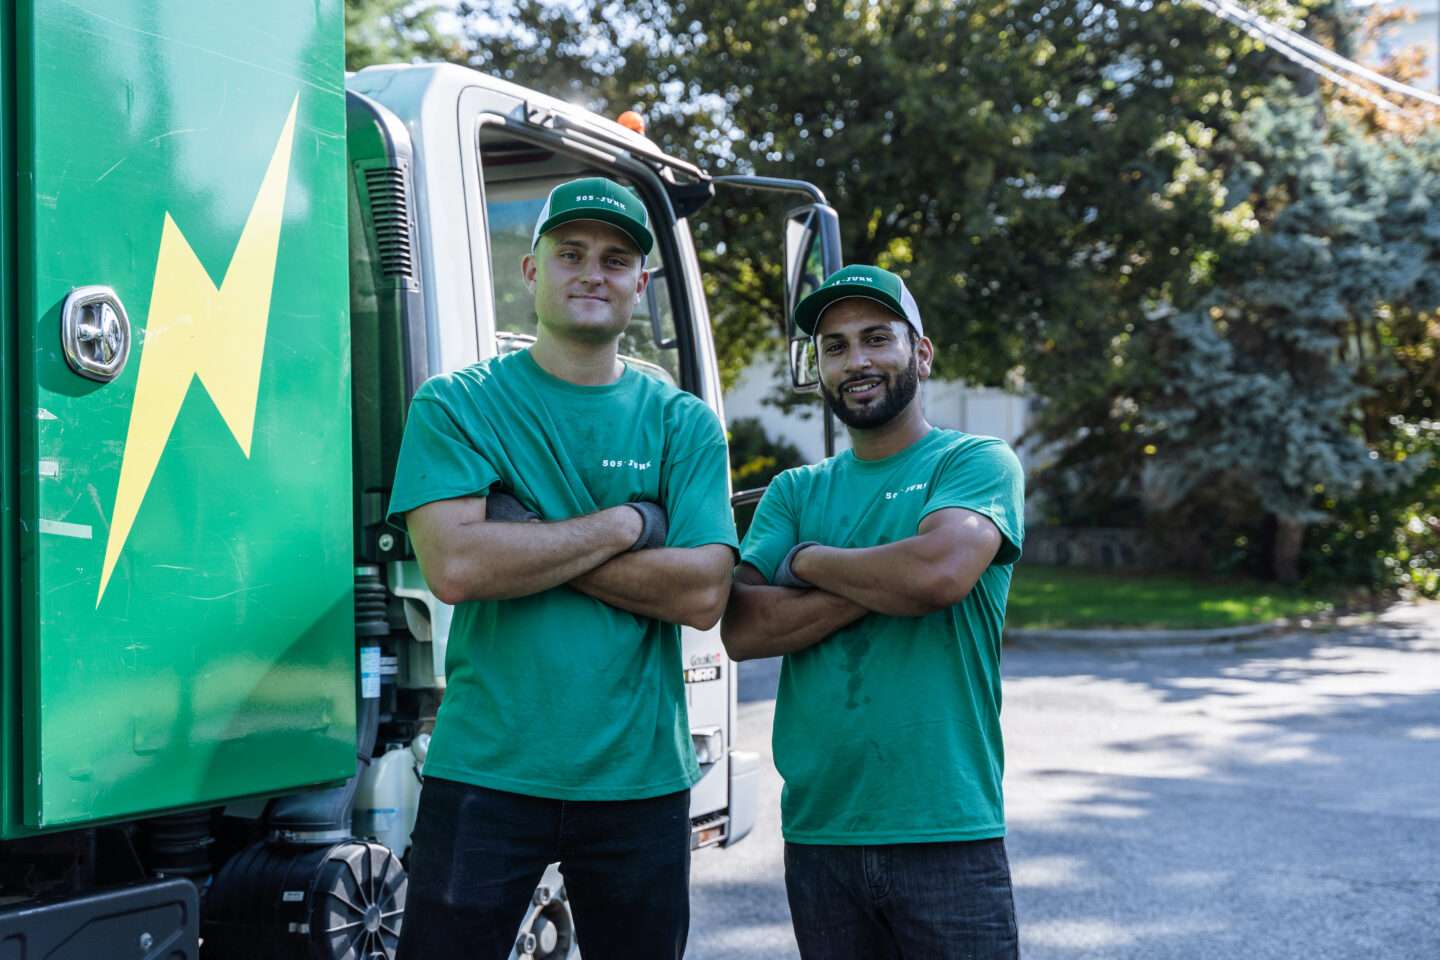 Two employees from Richmond's best junk removal company, 505-Junk.